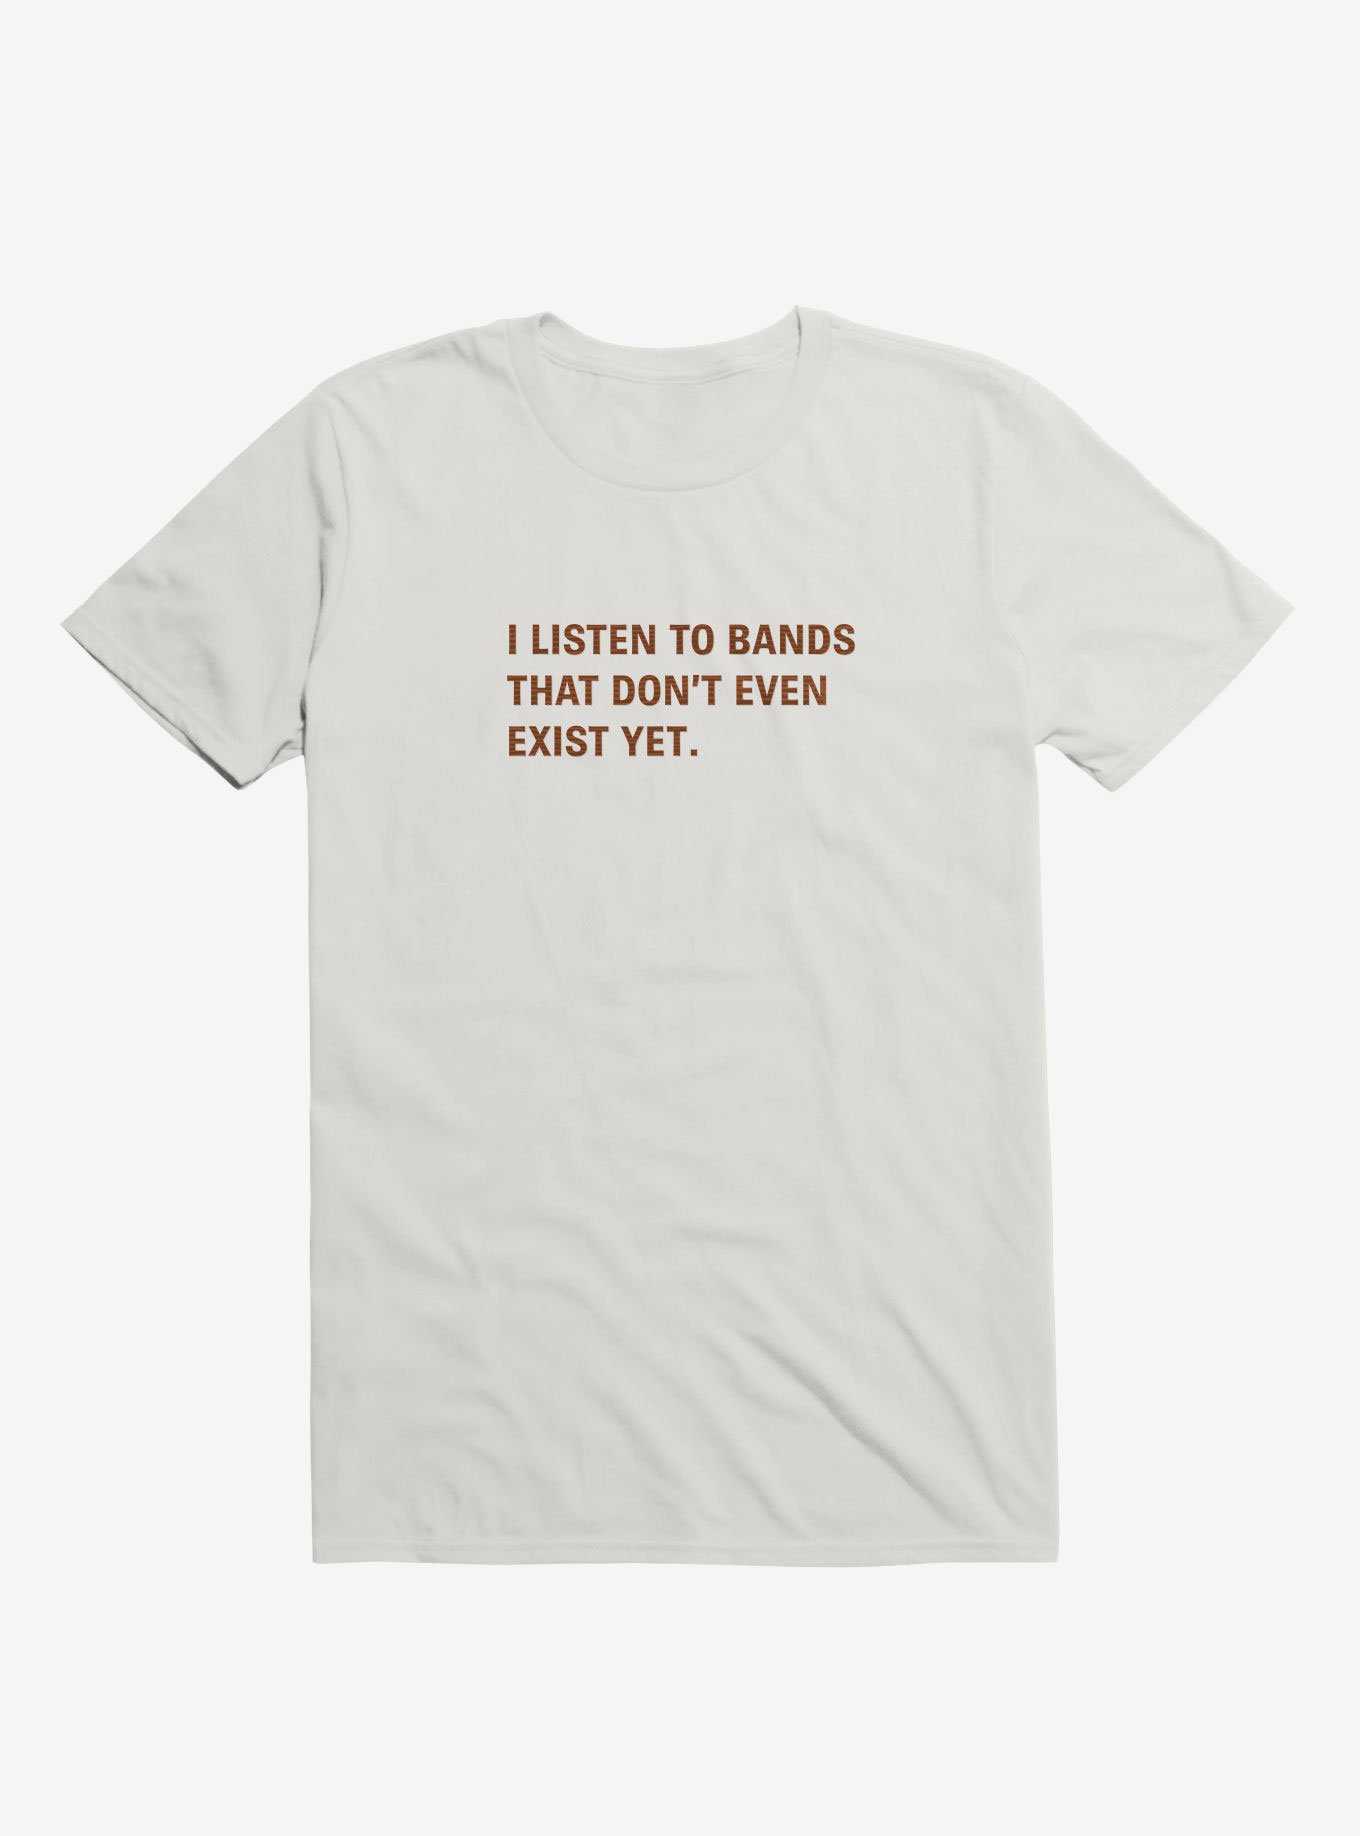 I Listen to Bands That Don't Even Exist Yet. T-Shirt, , hi-res